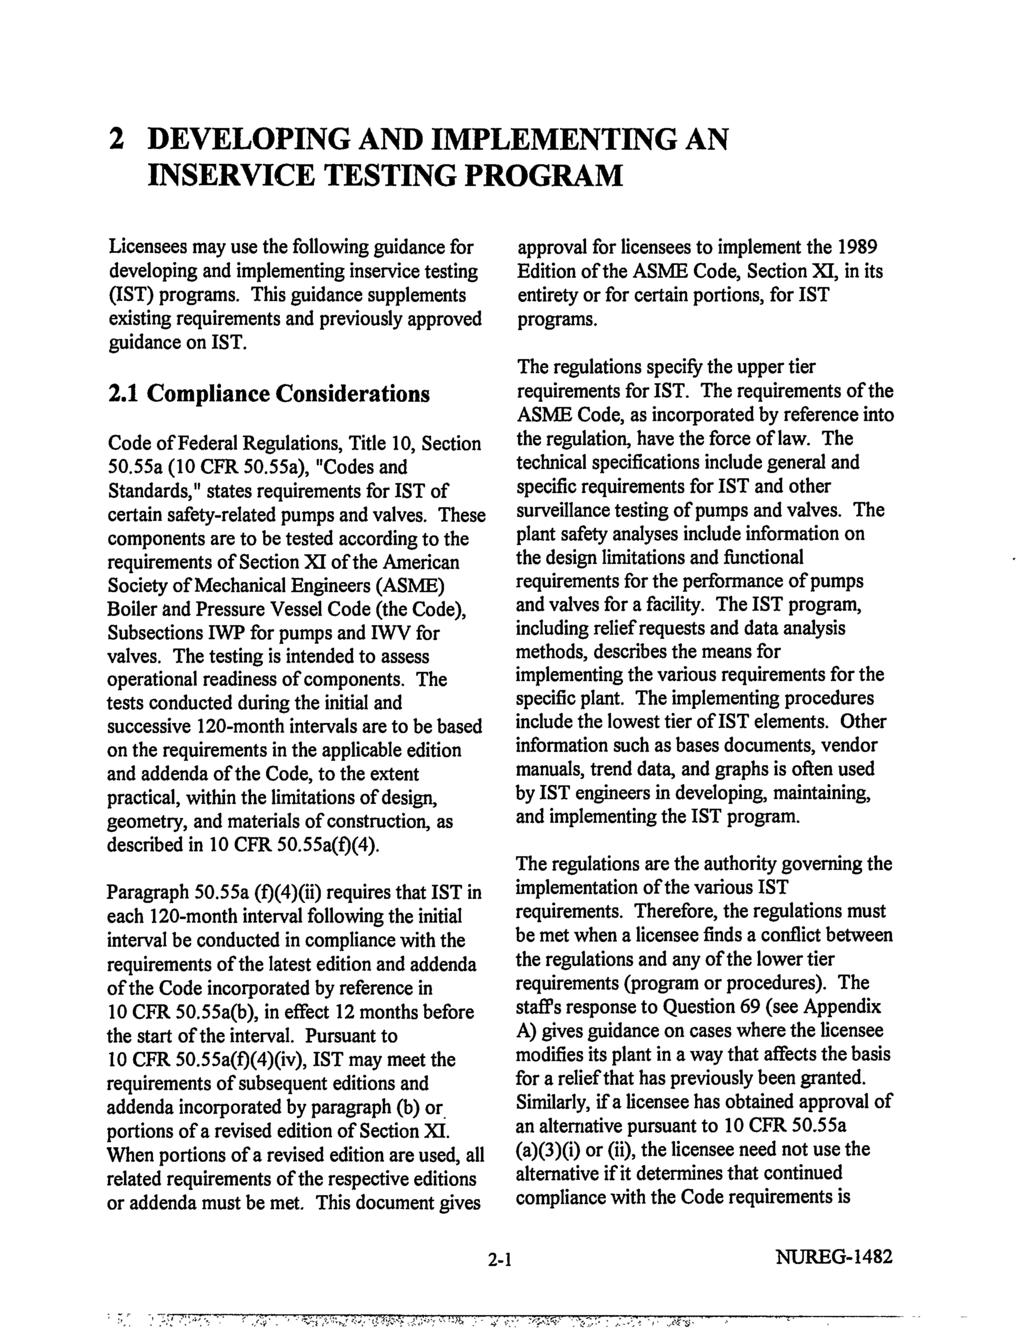 2 DEVELOPING AND IMPLEMENTING AN INSERVICE TESTING PROGRAM Licensees may use the following guidance for developing and implementing inservice testing (1ST) programs.